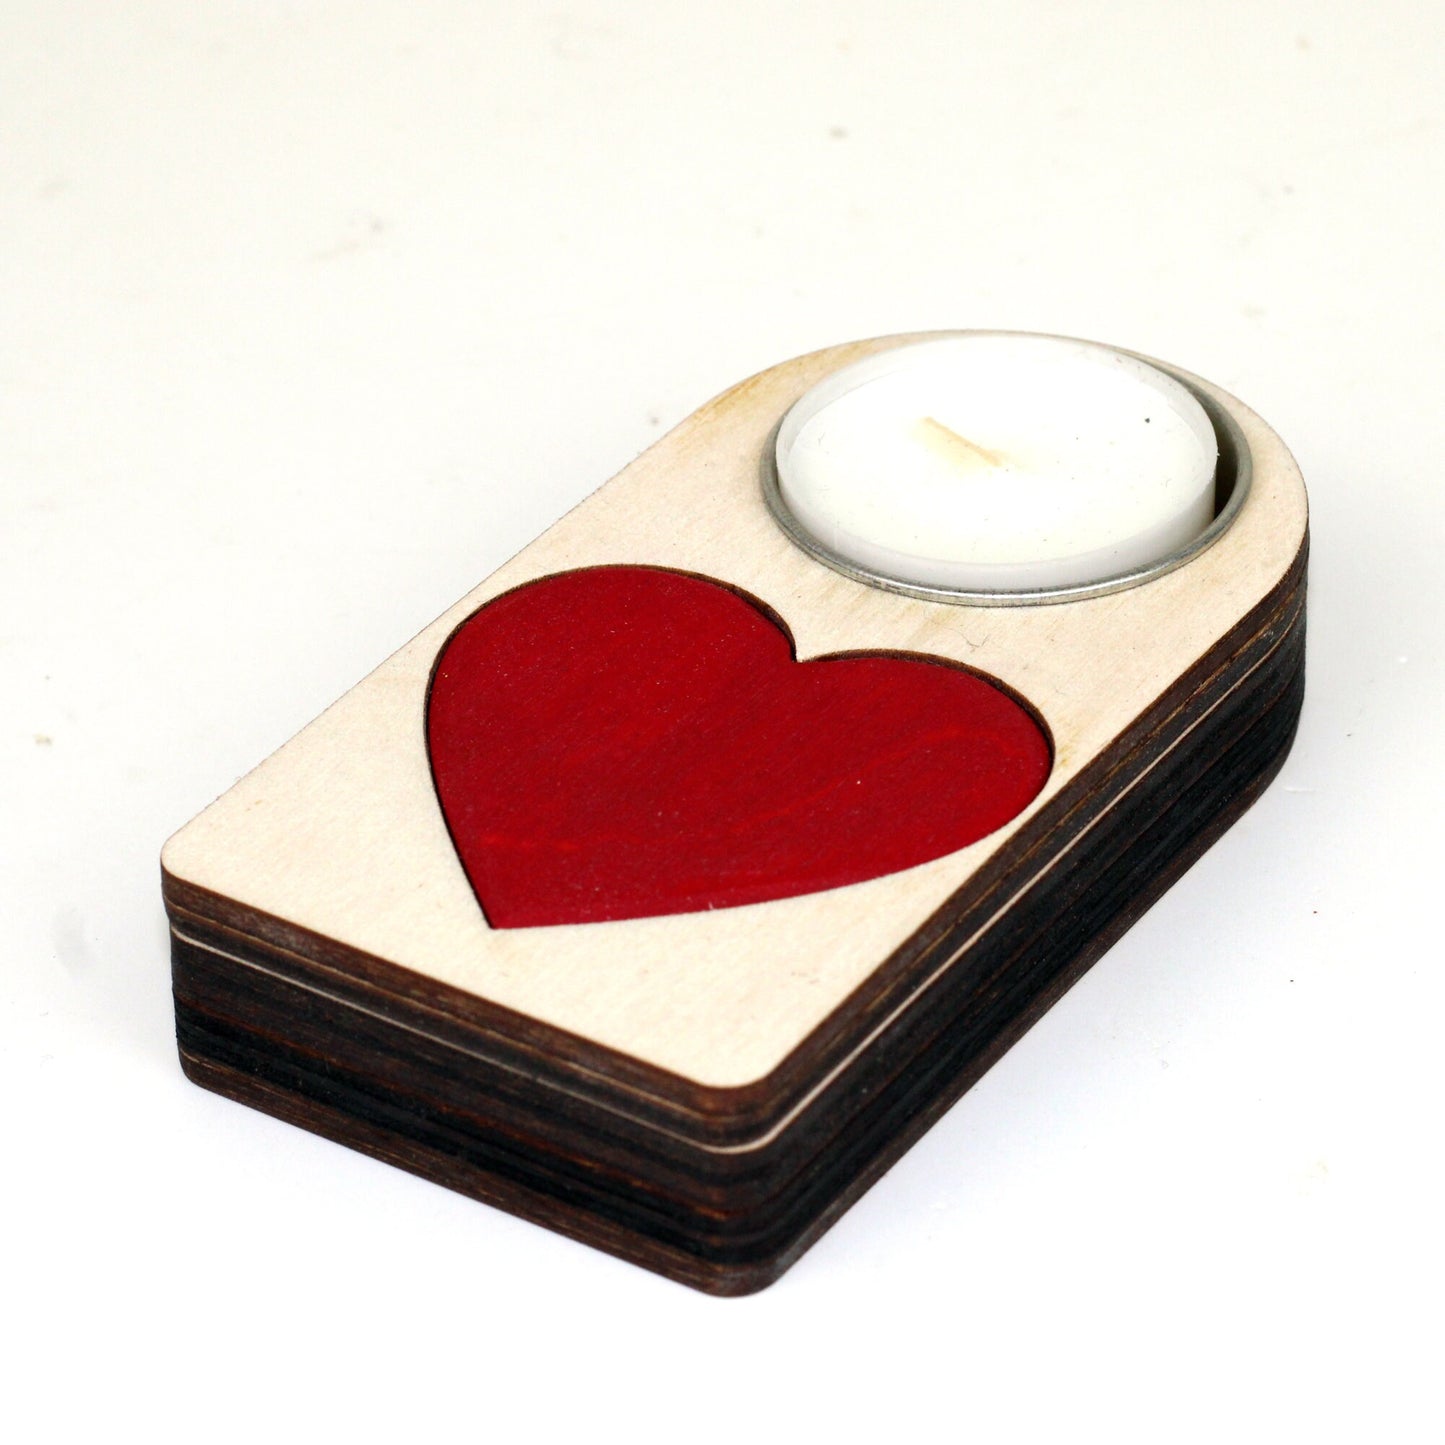 Engraved wooden candle holder with red heart motif and secret compartment, it holds tea light candle or nightlight